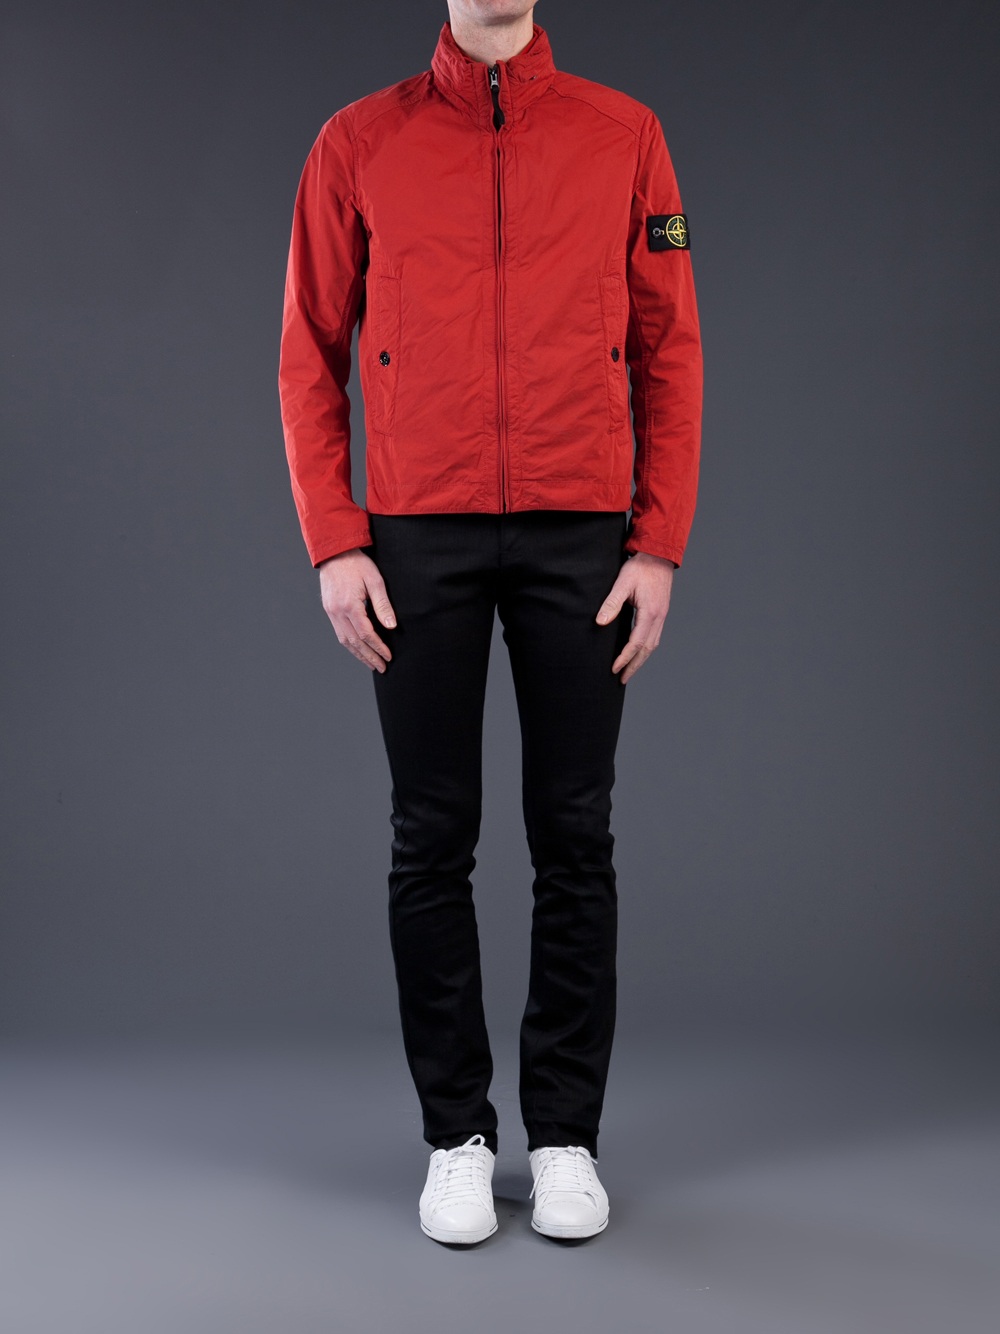 Stone Island Lightweight Jacket in Red for Men | Lyst